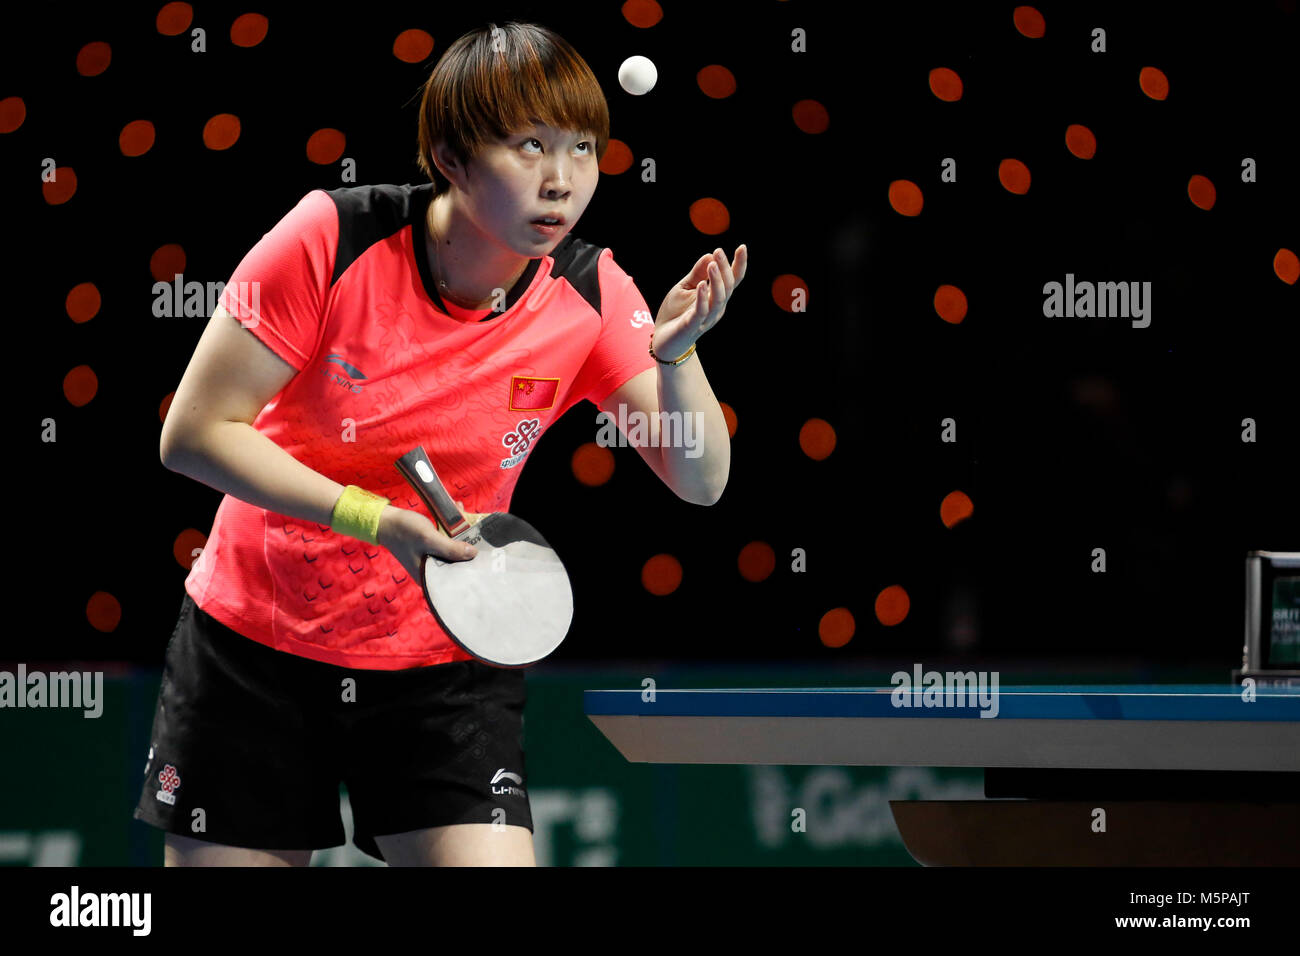 London, UK. 24th Feb, 2018. Zhu YULING of China during ITTF Team World Cup match between Zhu YULING of China and DOO Hoi Dem of Hong Kong -, Semi Finals men doubles match on February 24, 2018 in Copper Box Arena, Olympic Park, London. Credit: Michal Busko/Alamy Live News Stock Photo